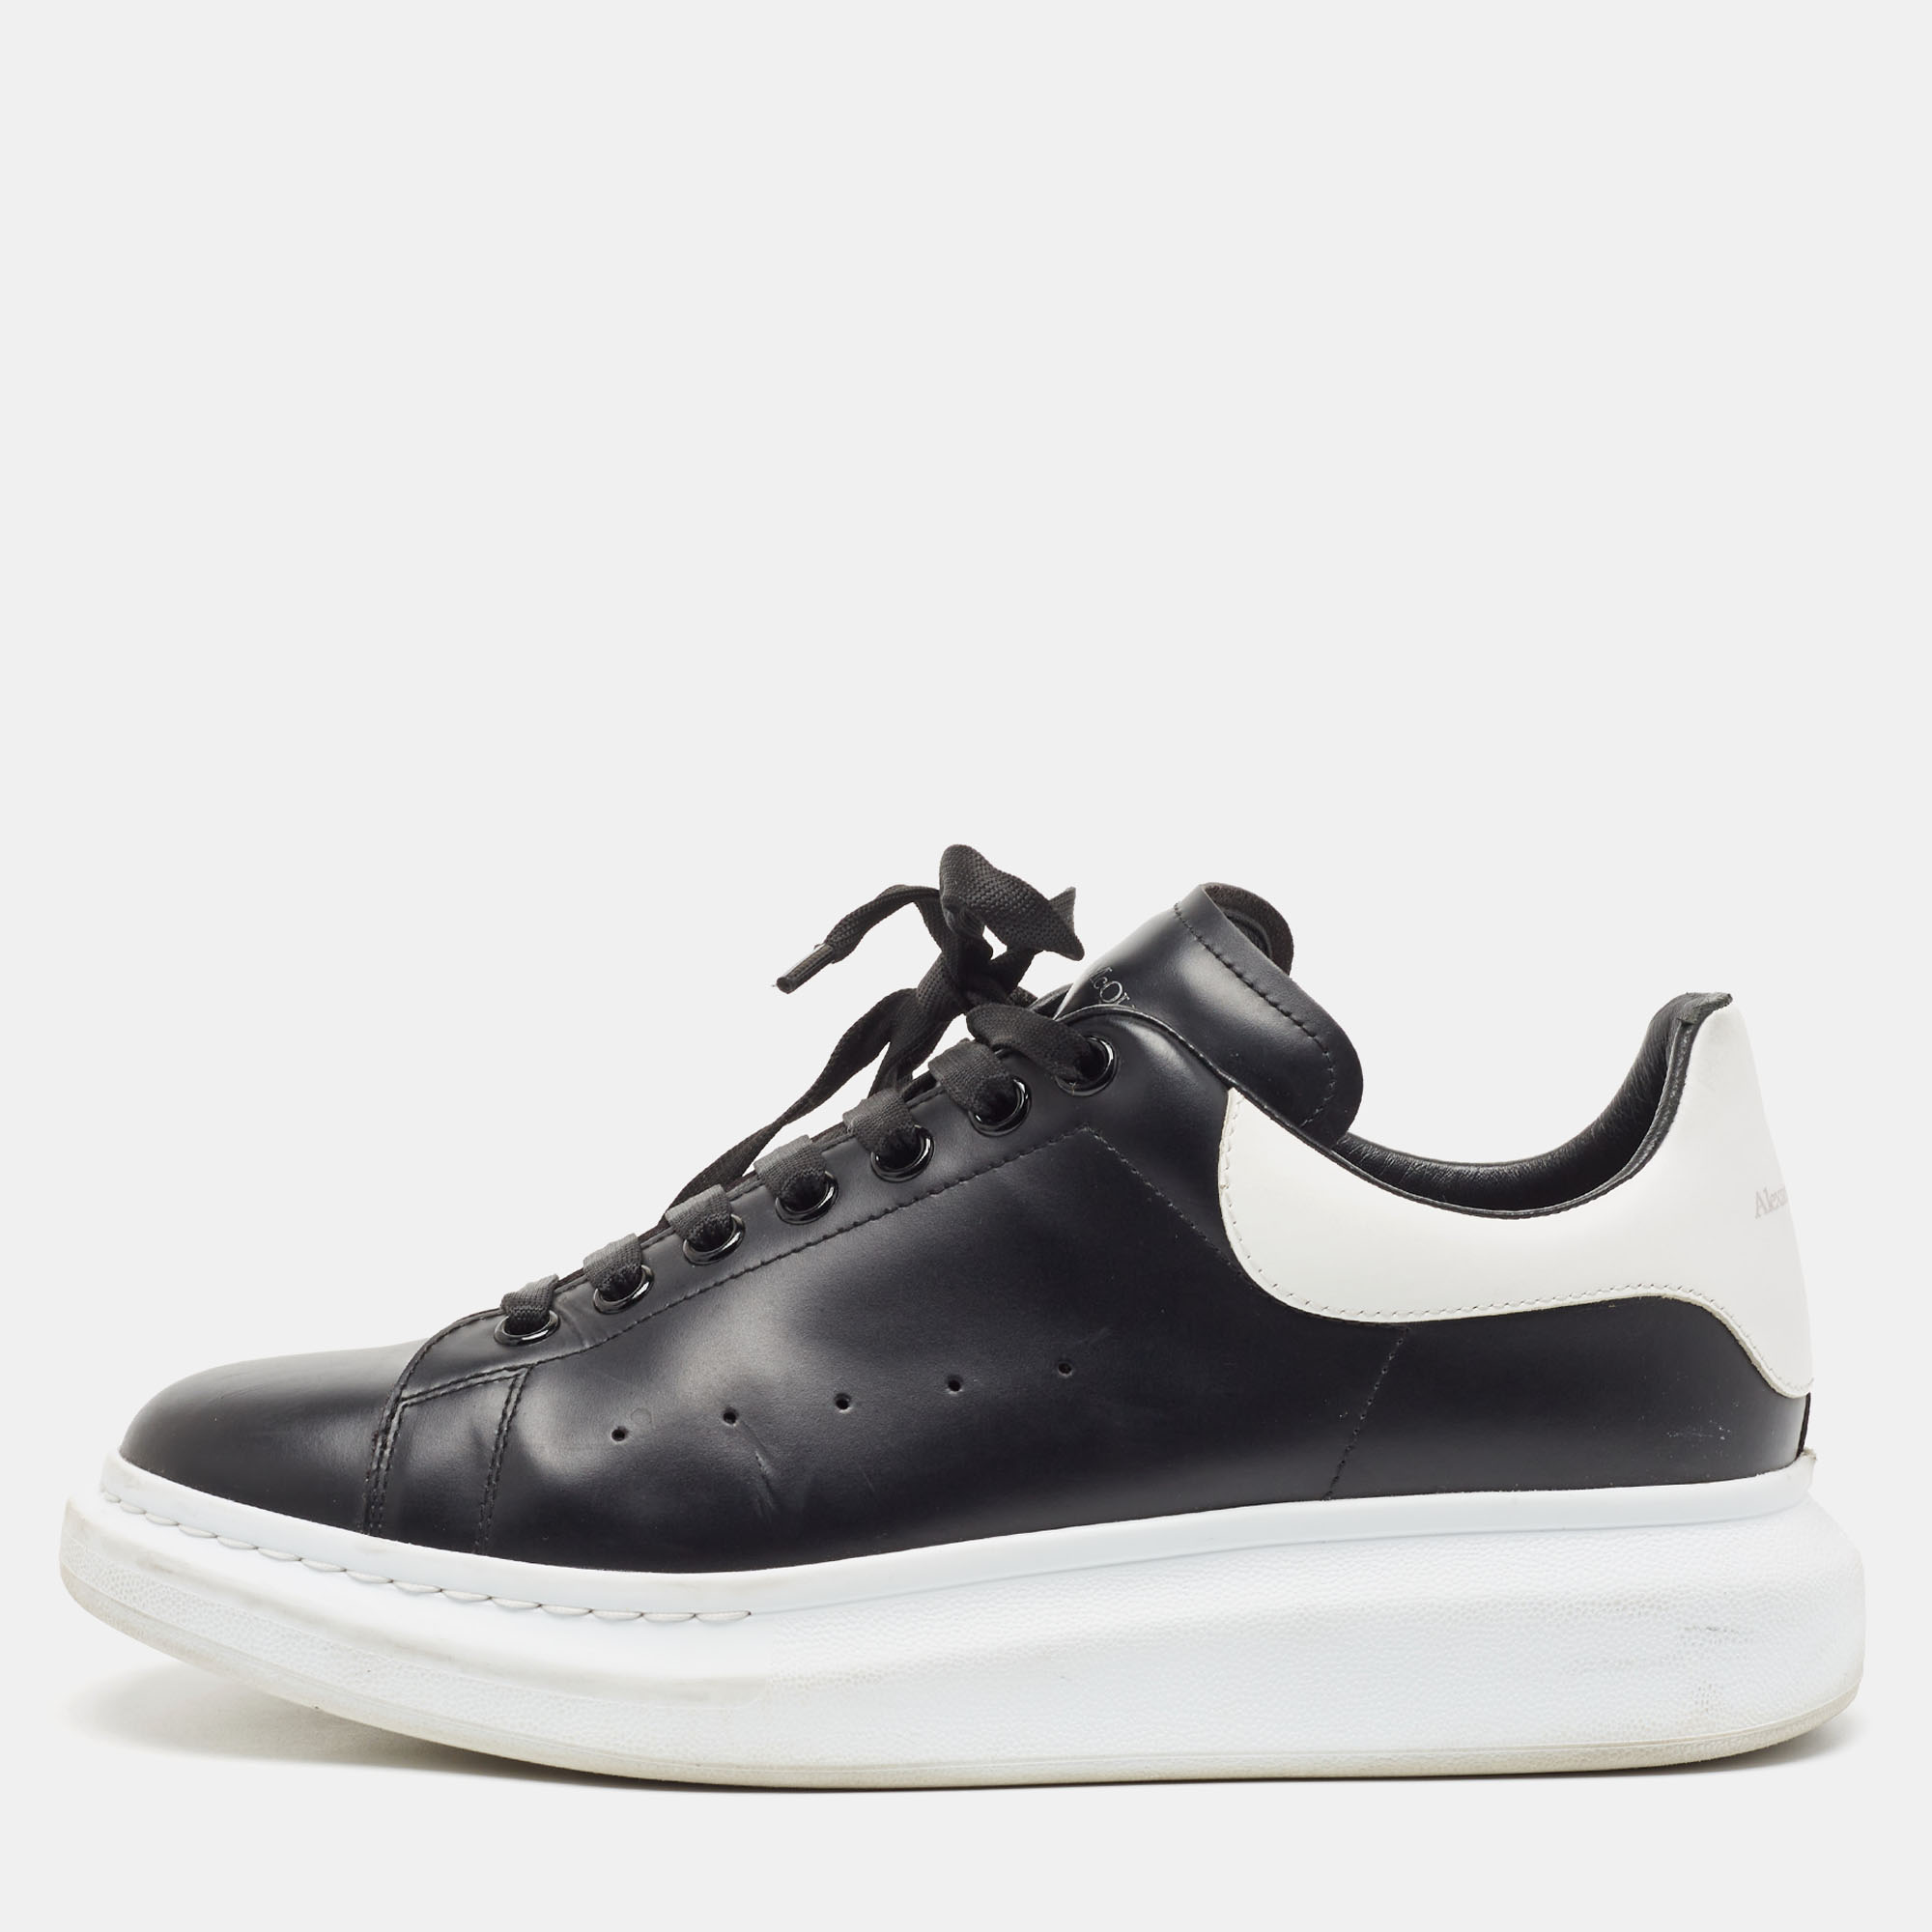 Alexander McQueen Black/White Leather Oversized Sneakers Size 44